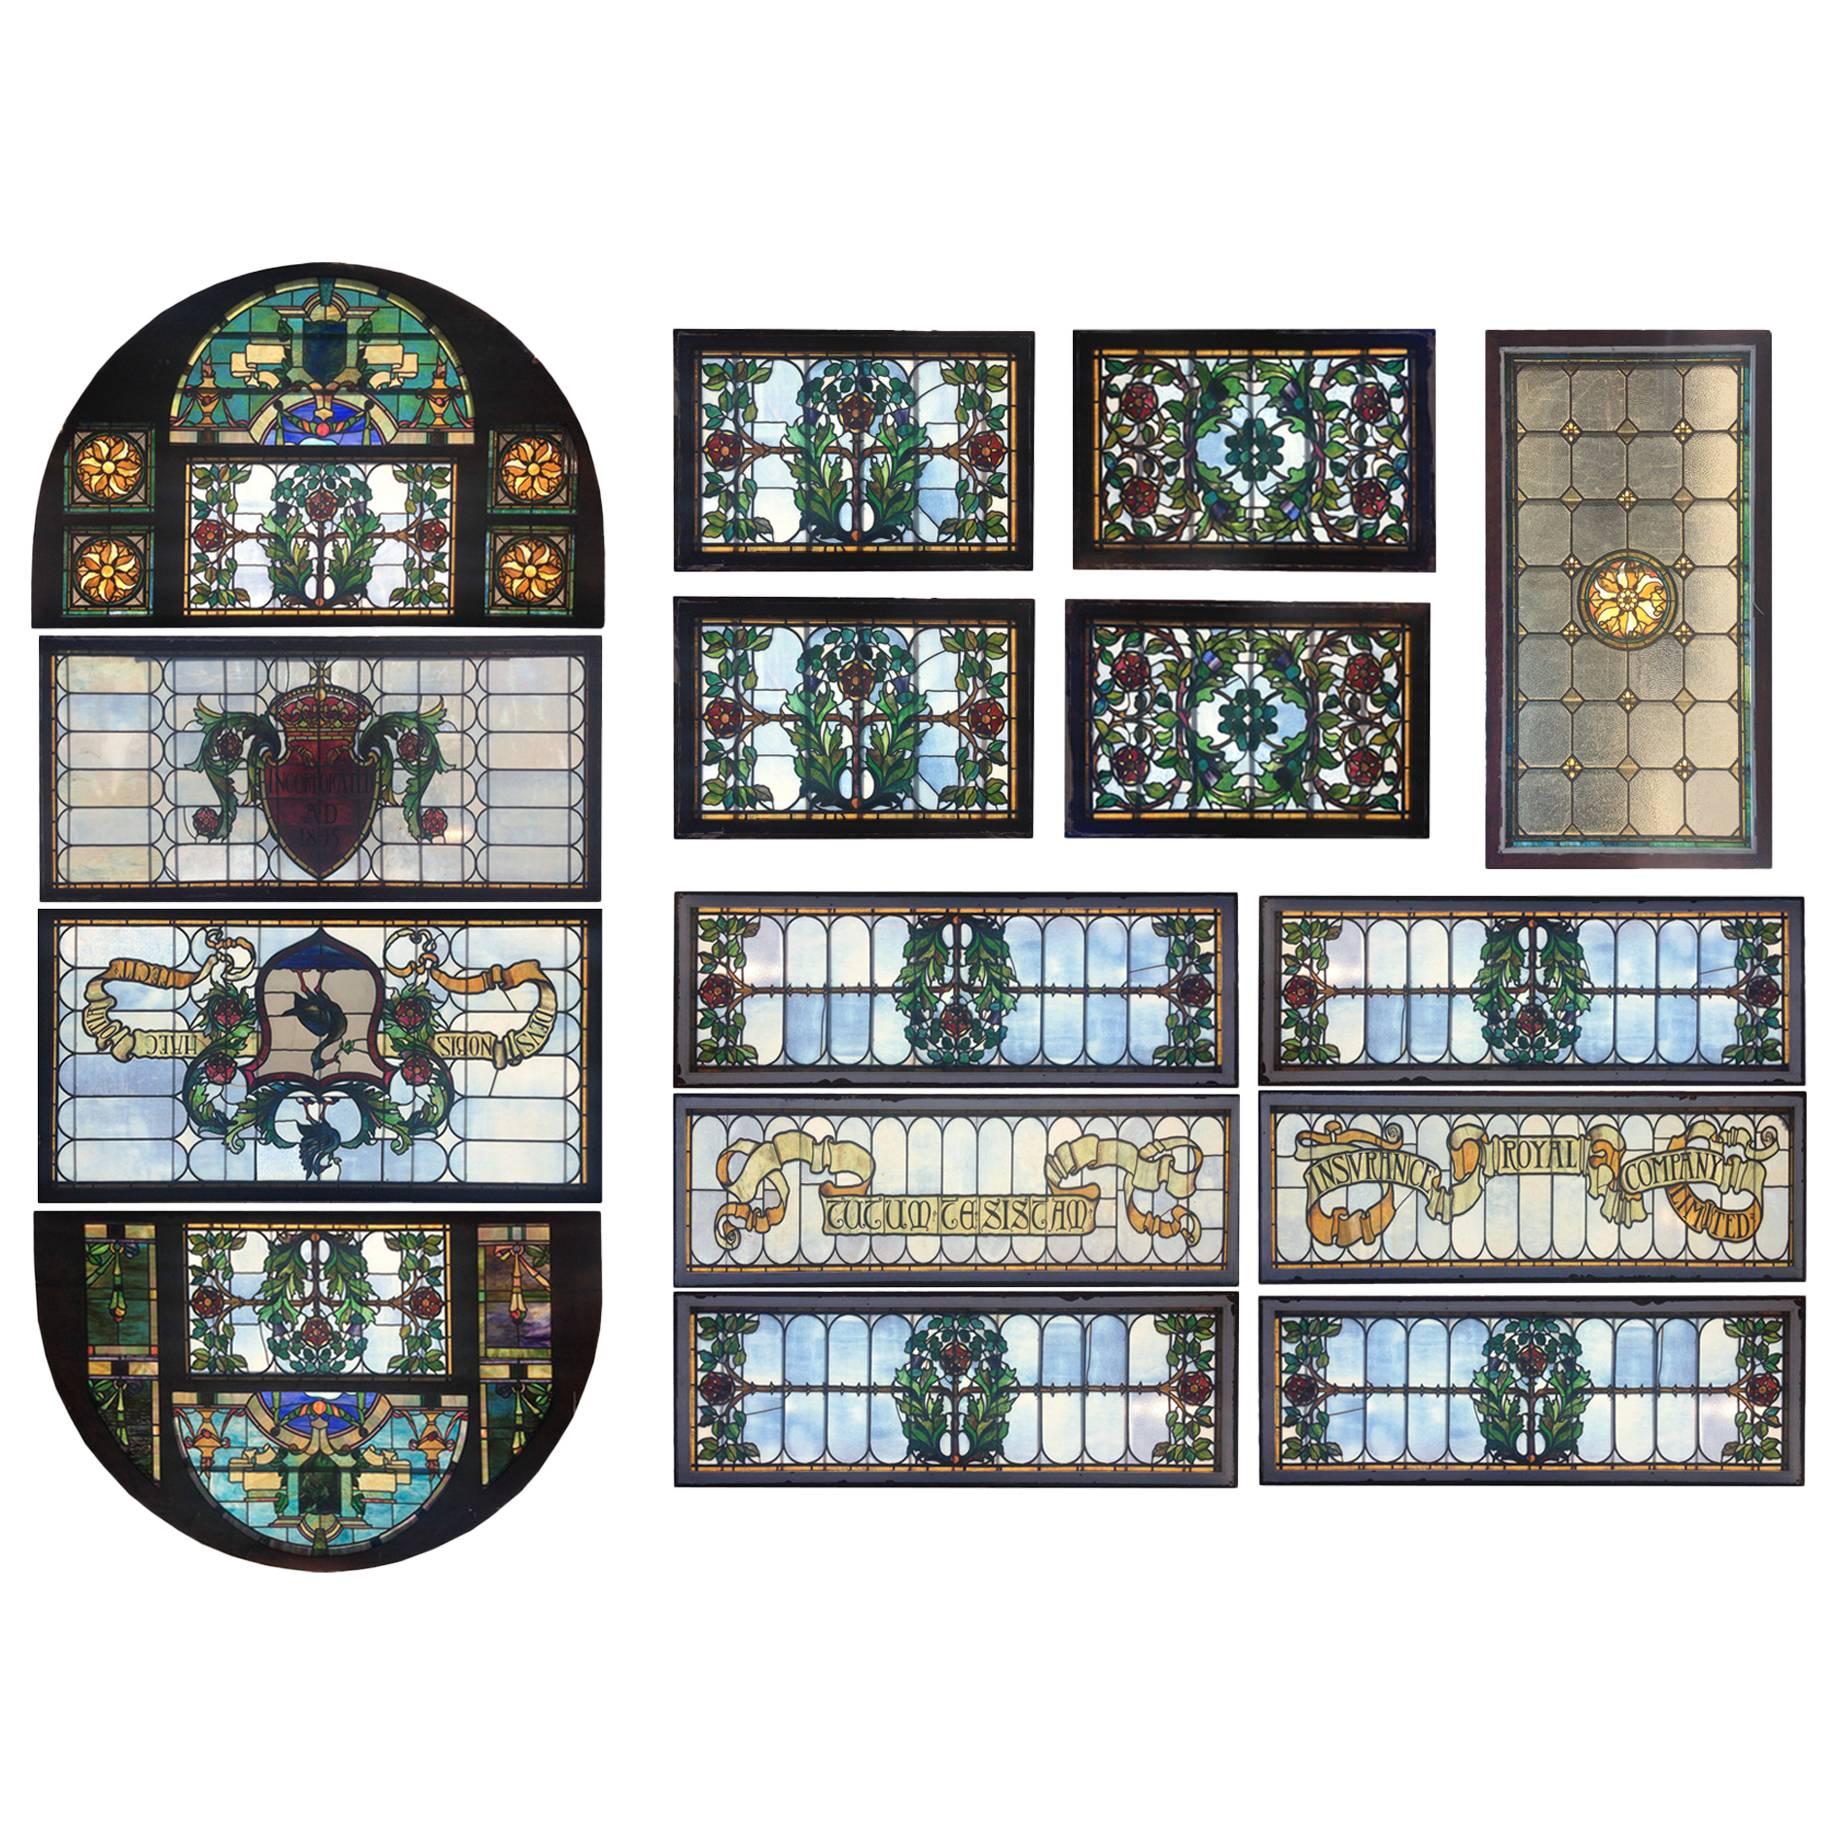 "Building a Mansion" Stained Glass Ceiling Landmark Building S.F. For Sale